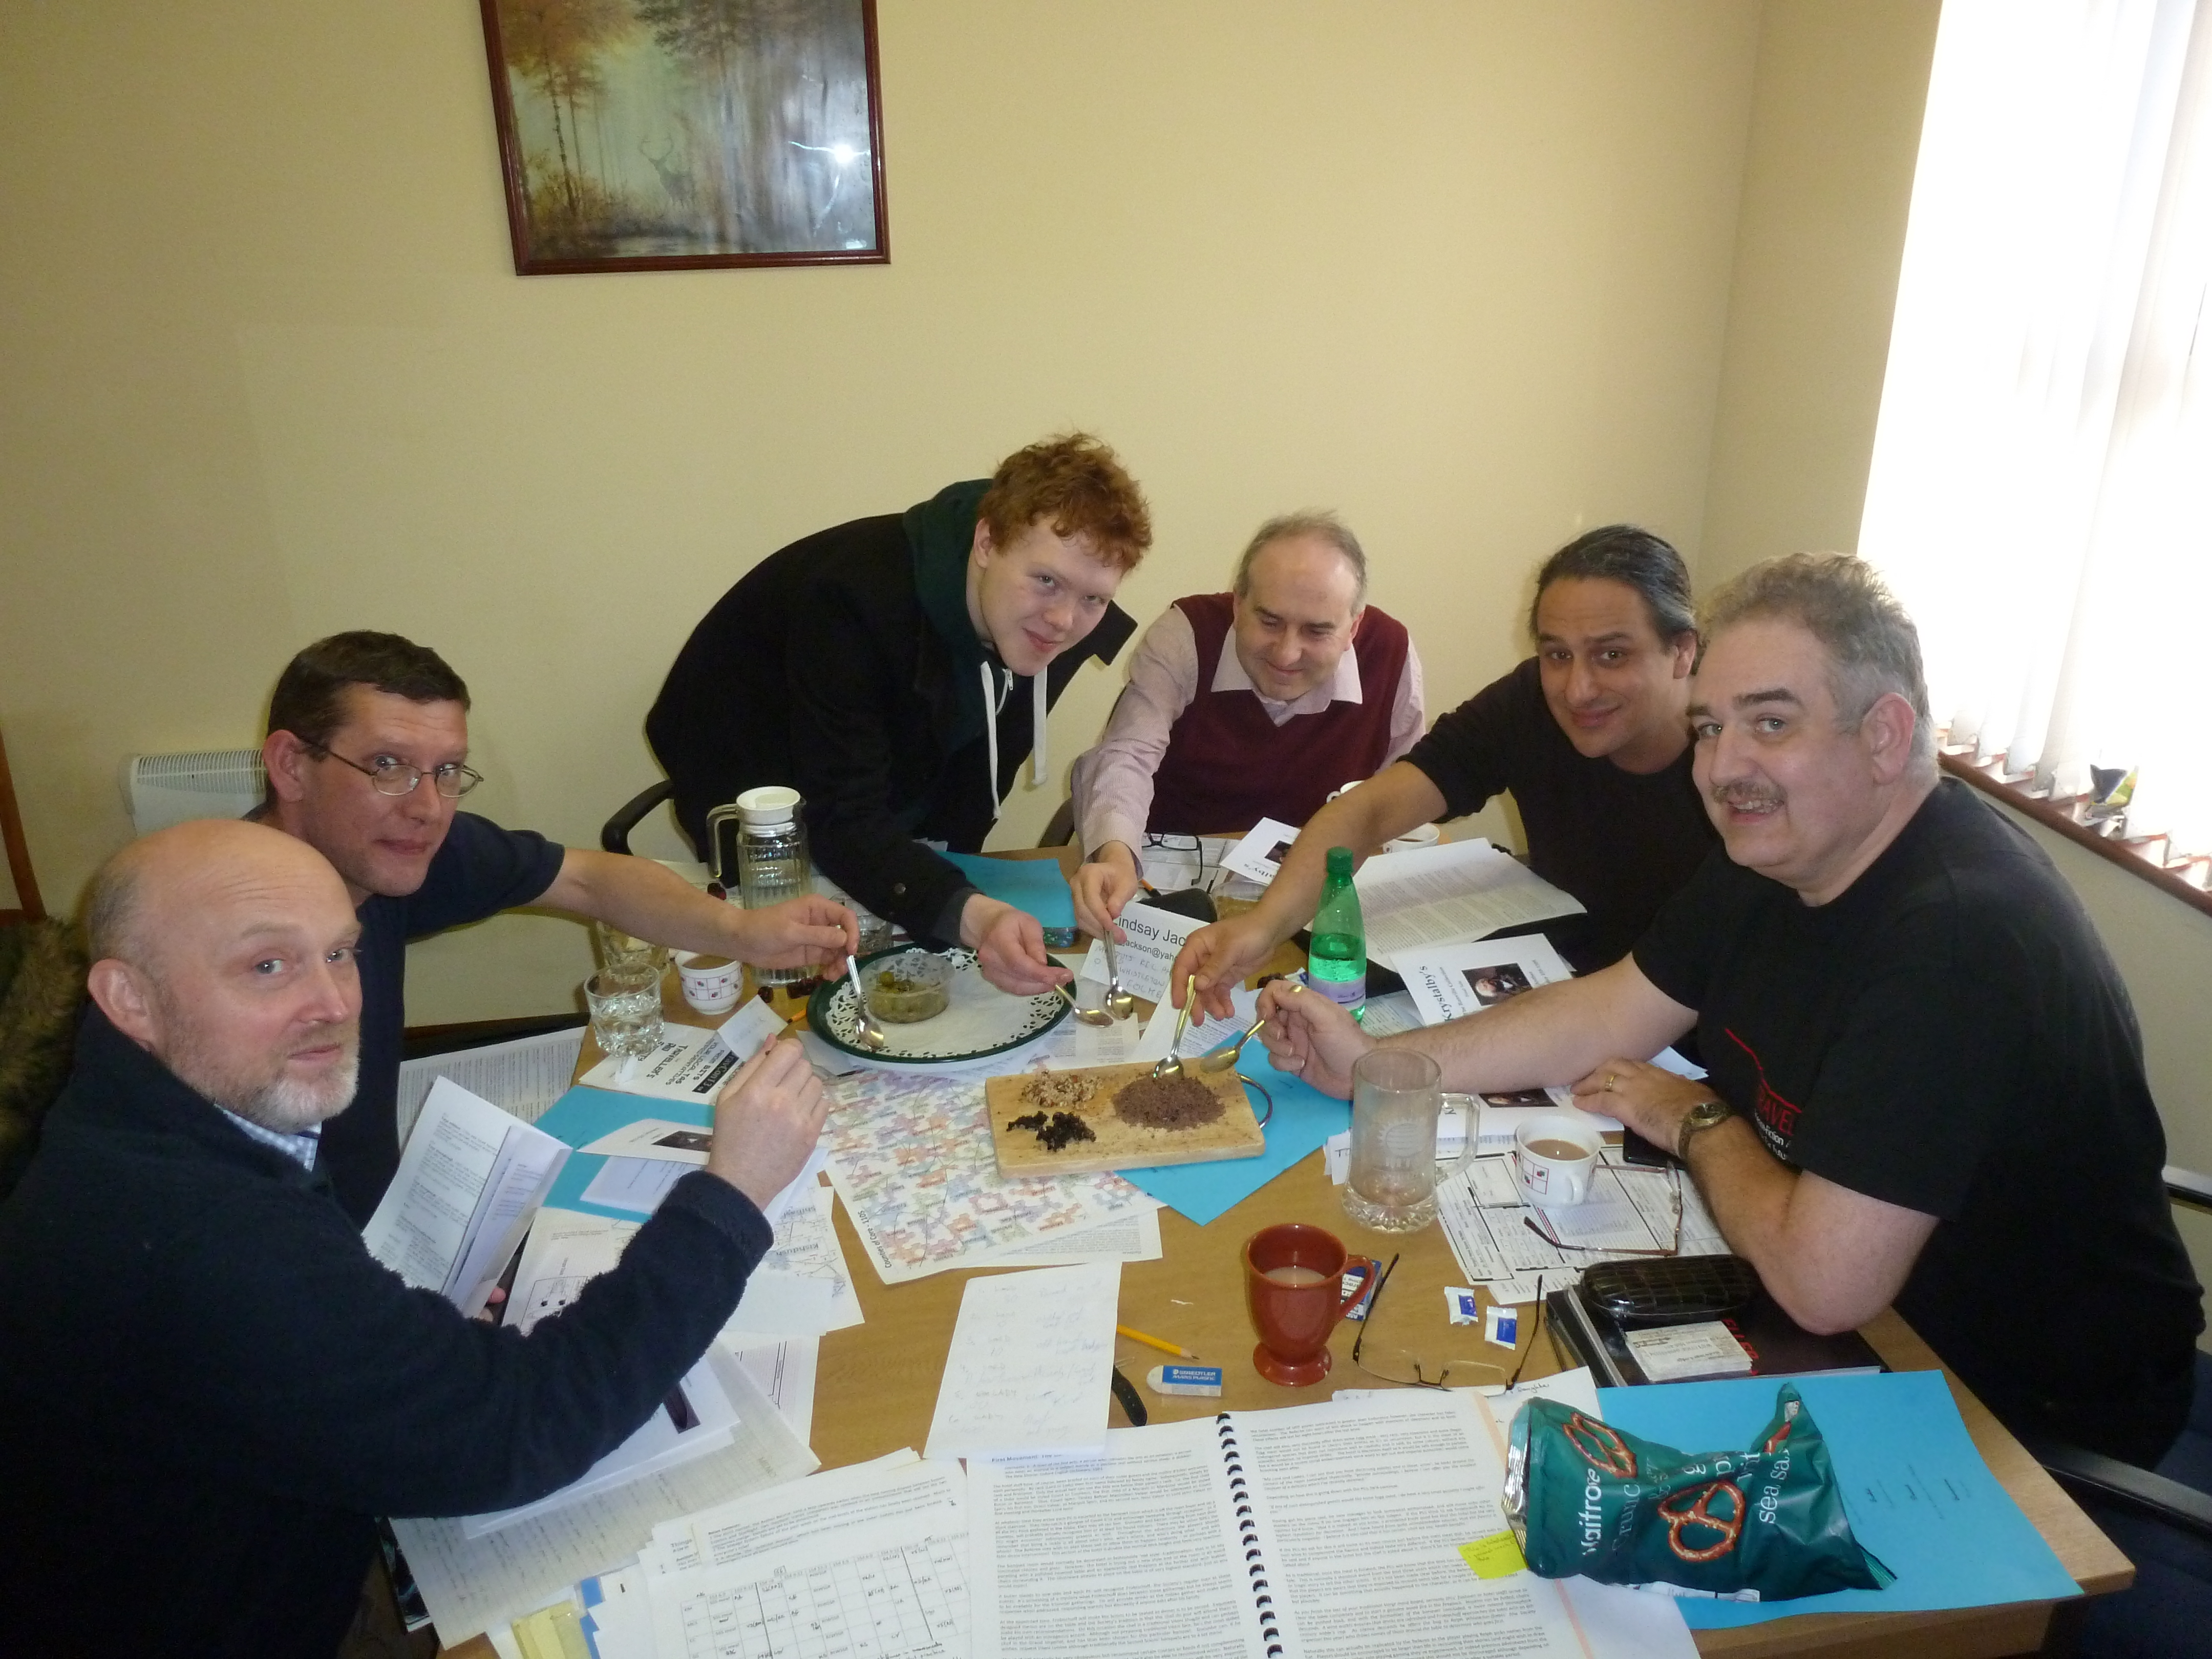 The scions tuck into the final course of their banquet: the Vargr merd board